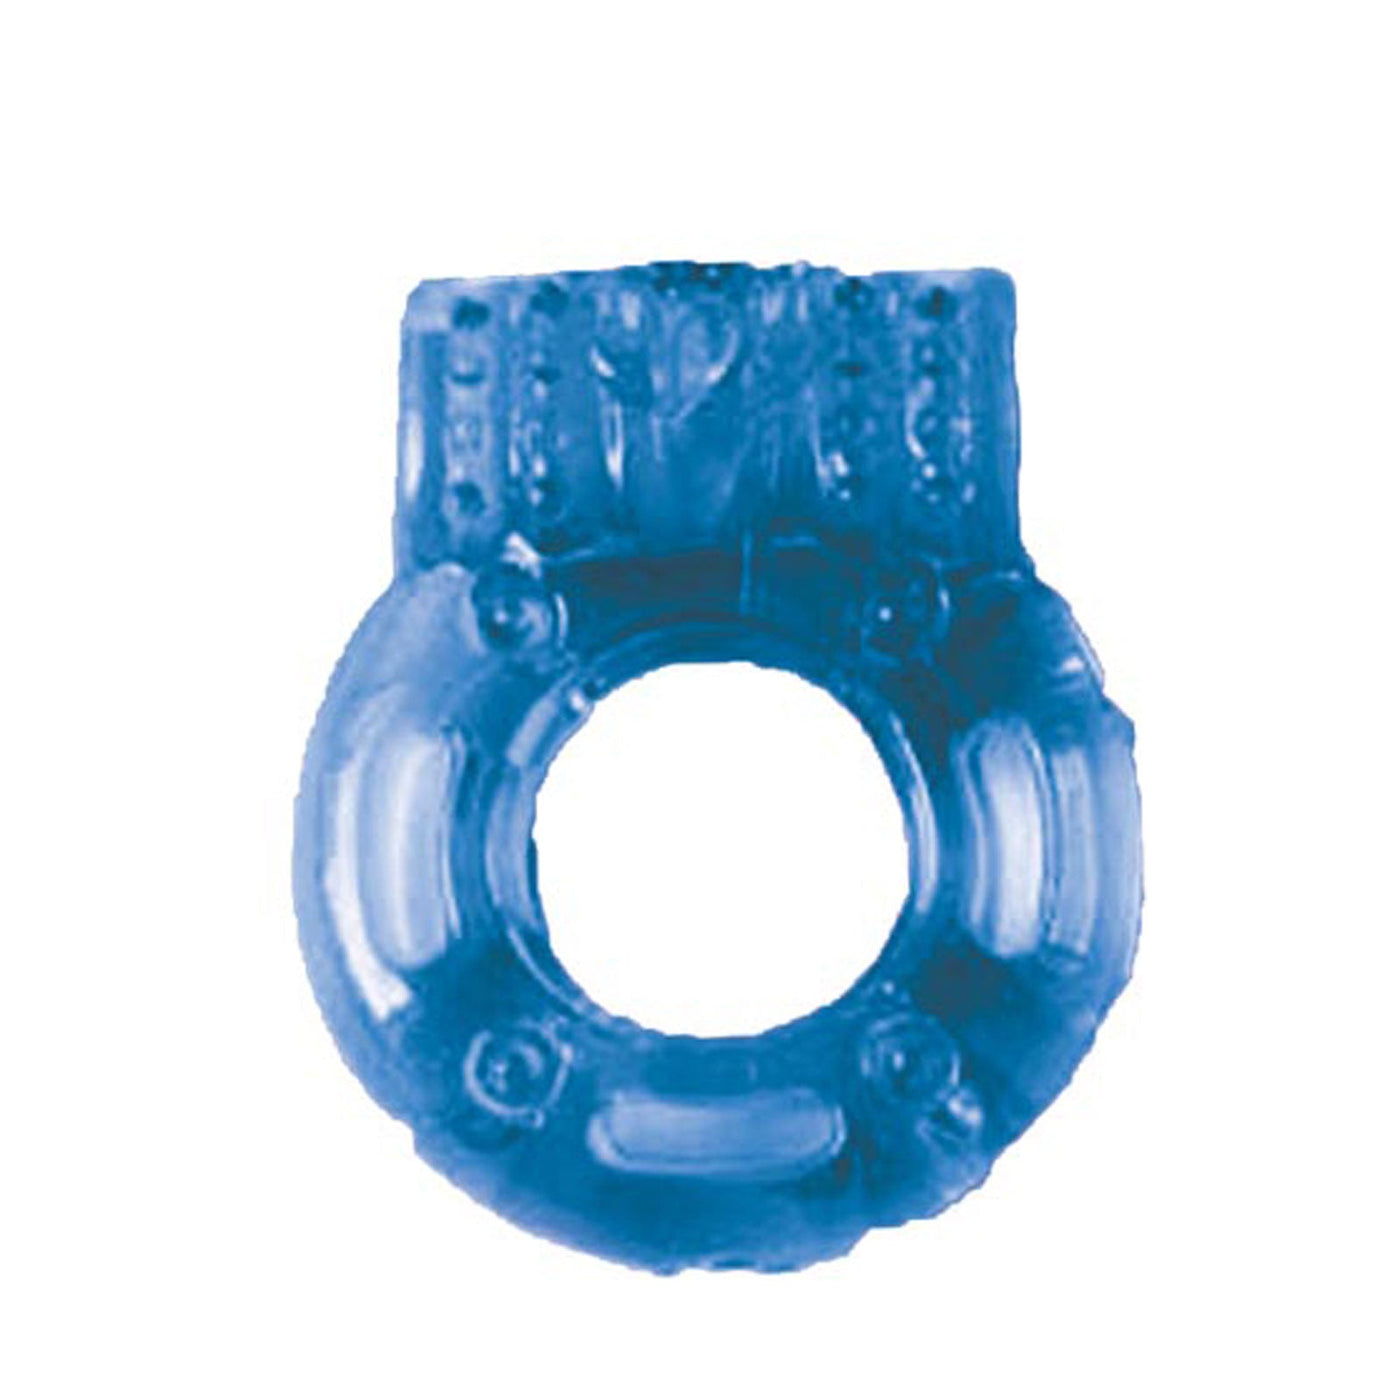 The MachO Vibrating Cock Ring More Toys Nasstoys Blue 